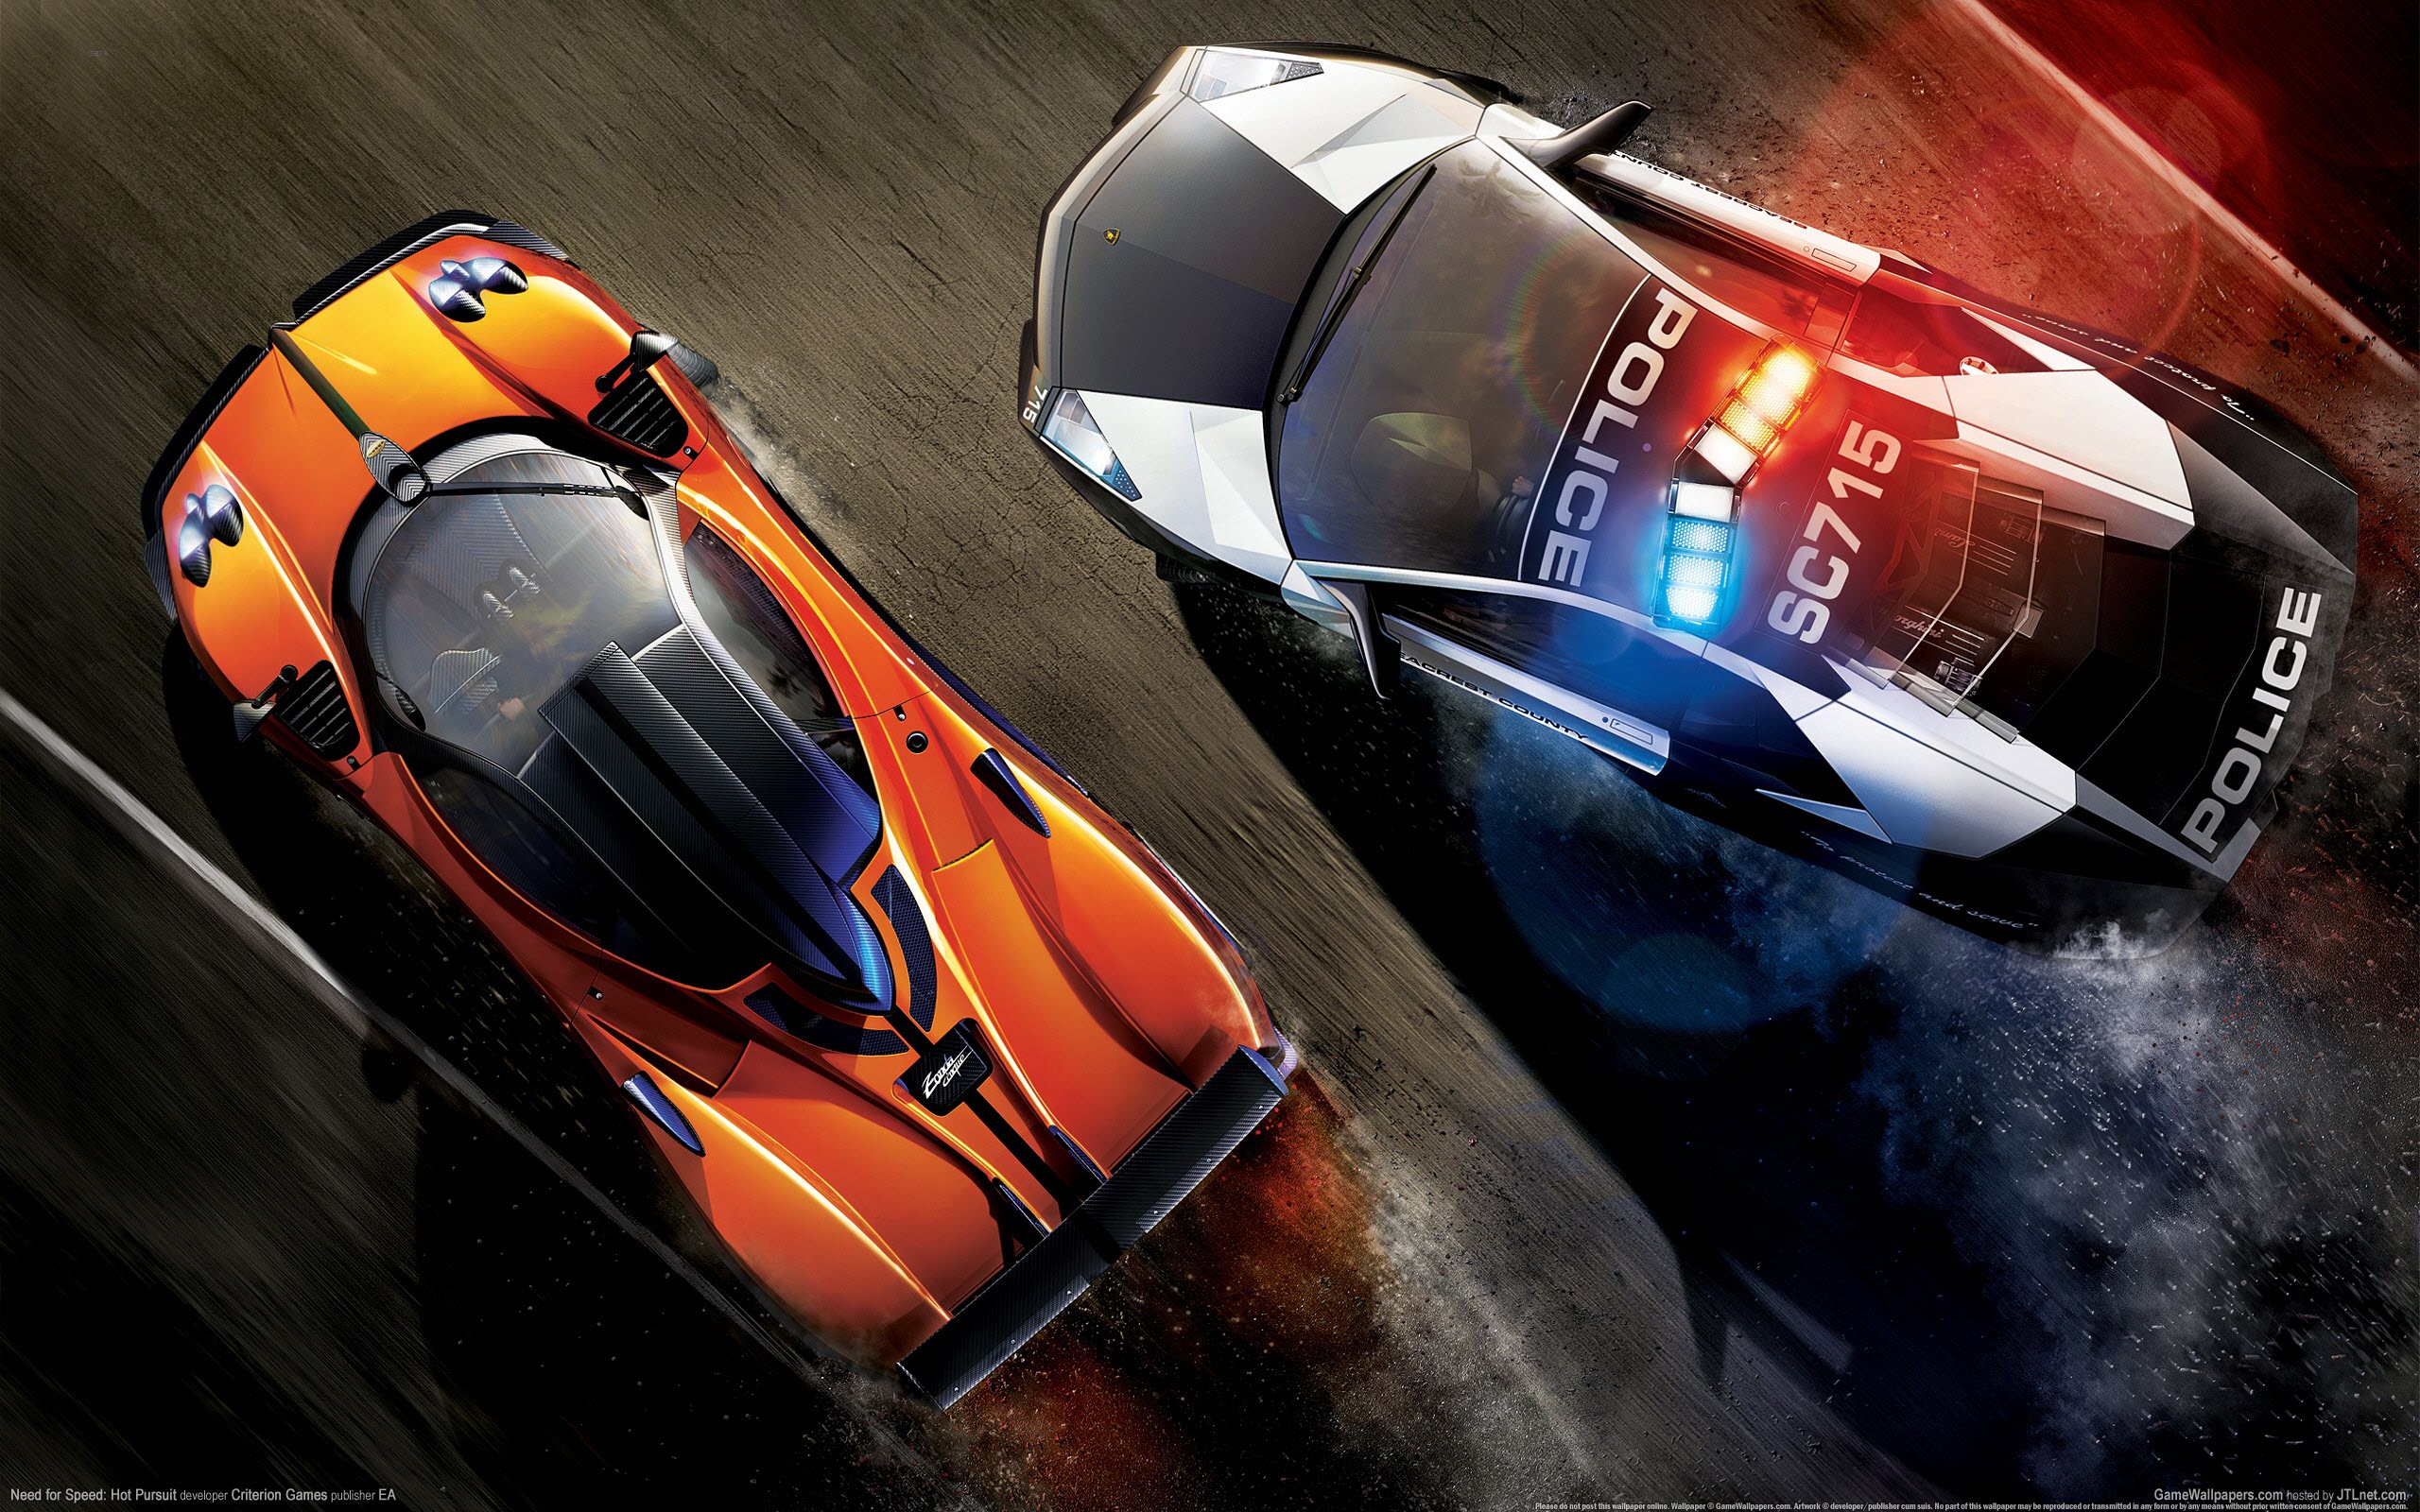 Need for Speed: Hot Pursuit Xbox 360 Review